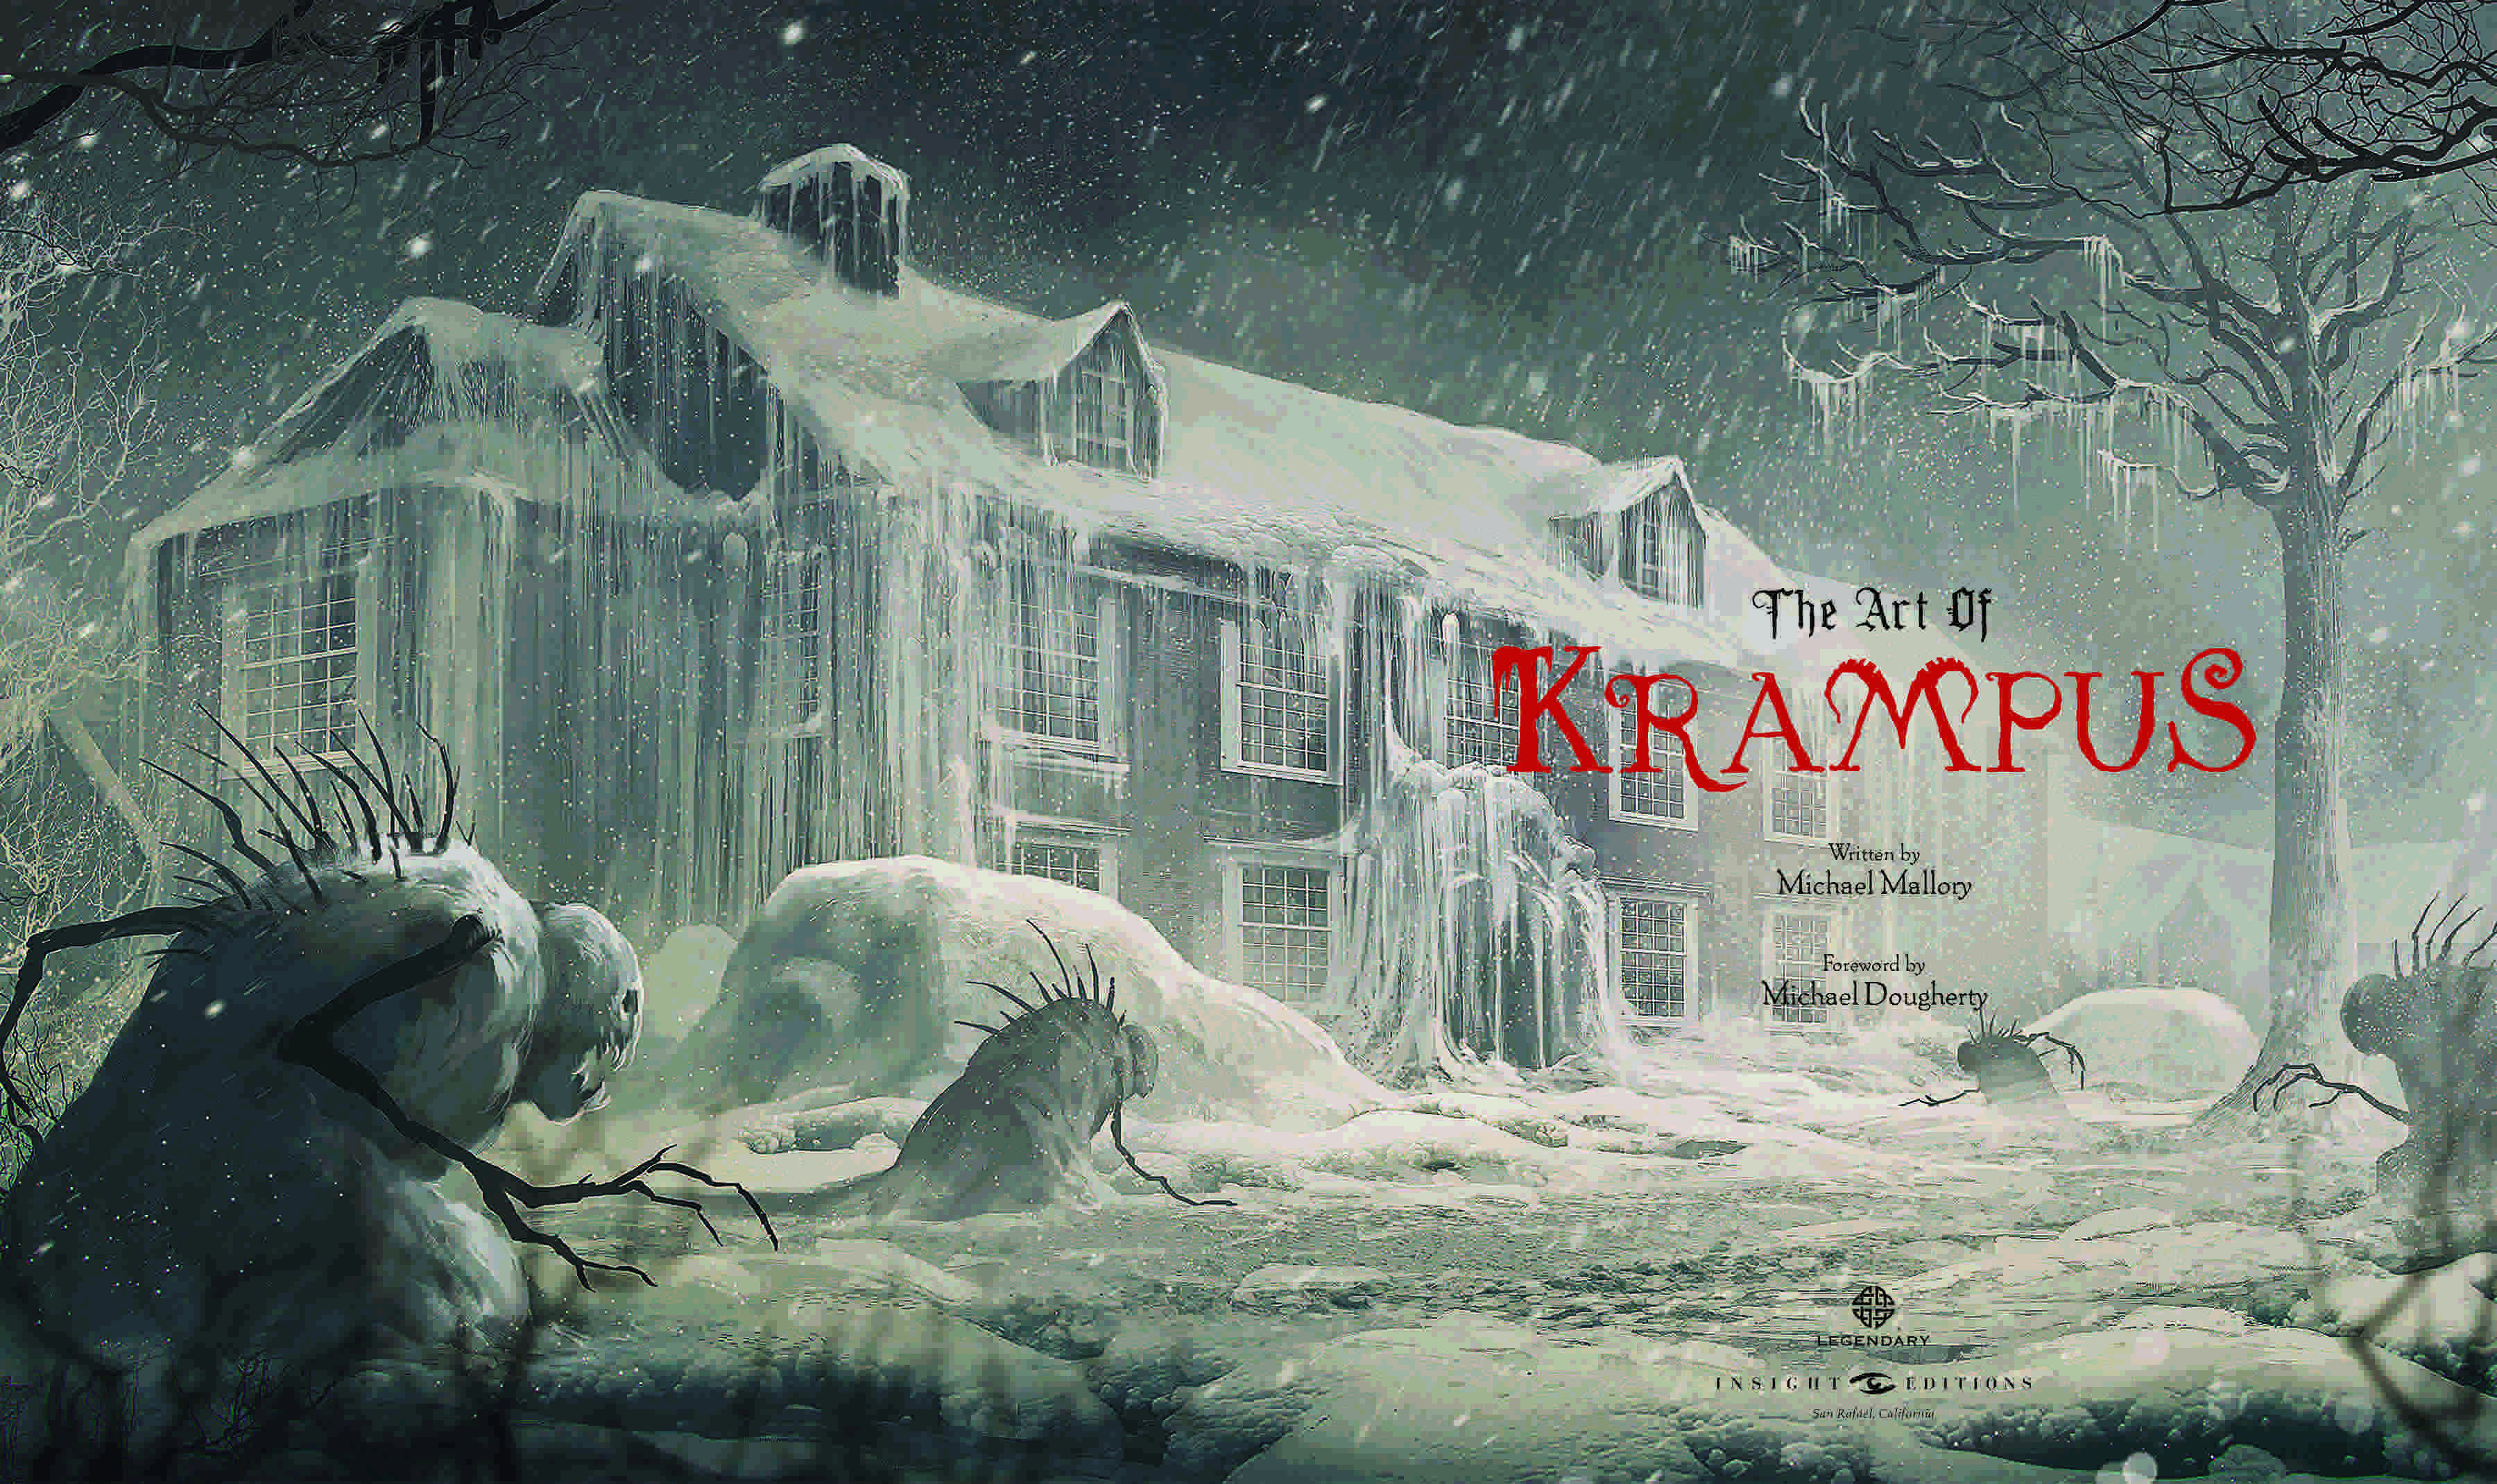 The Art of Krampus Review